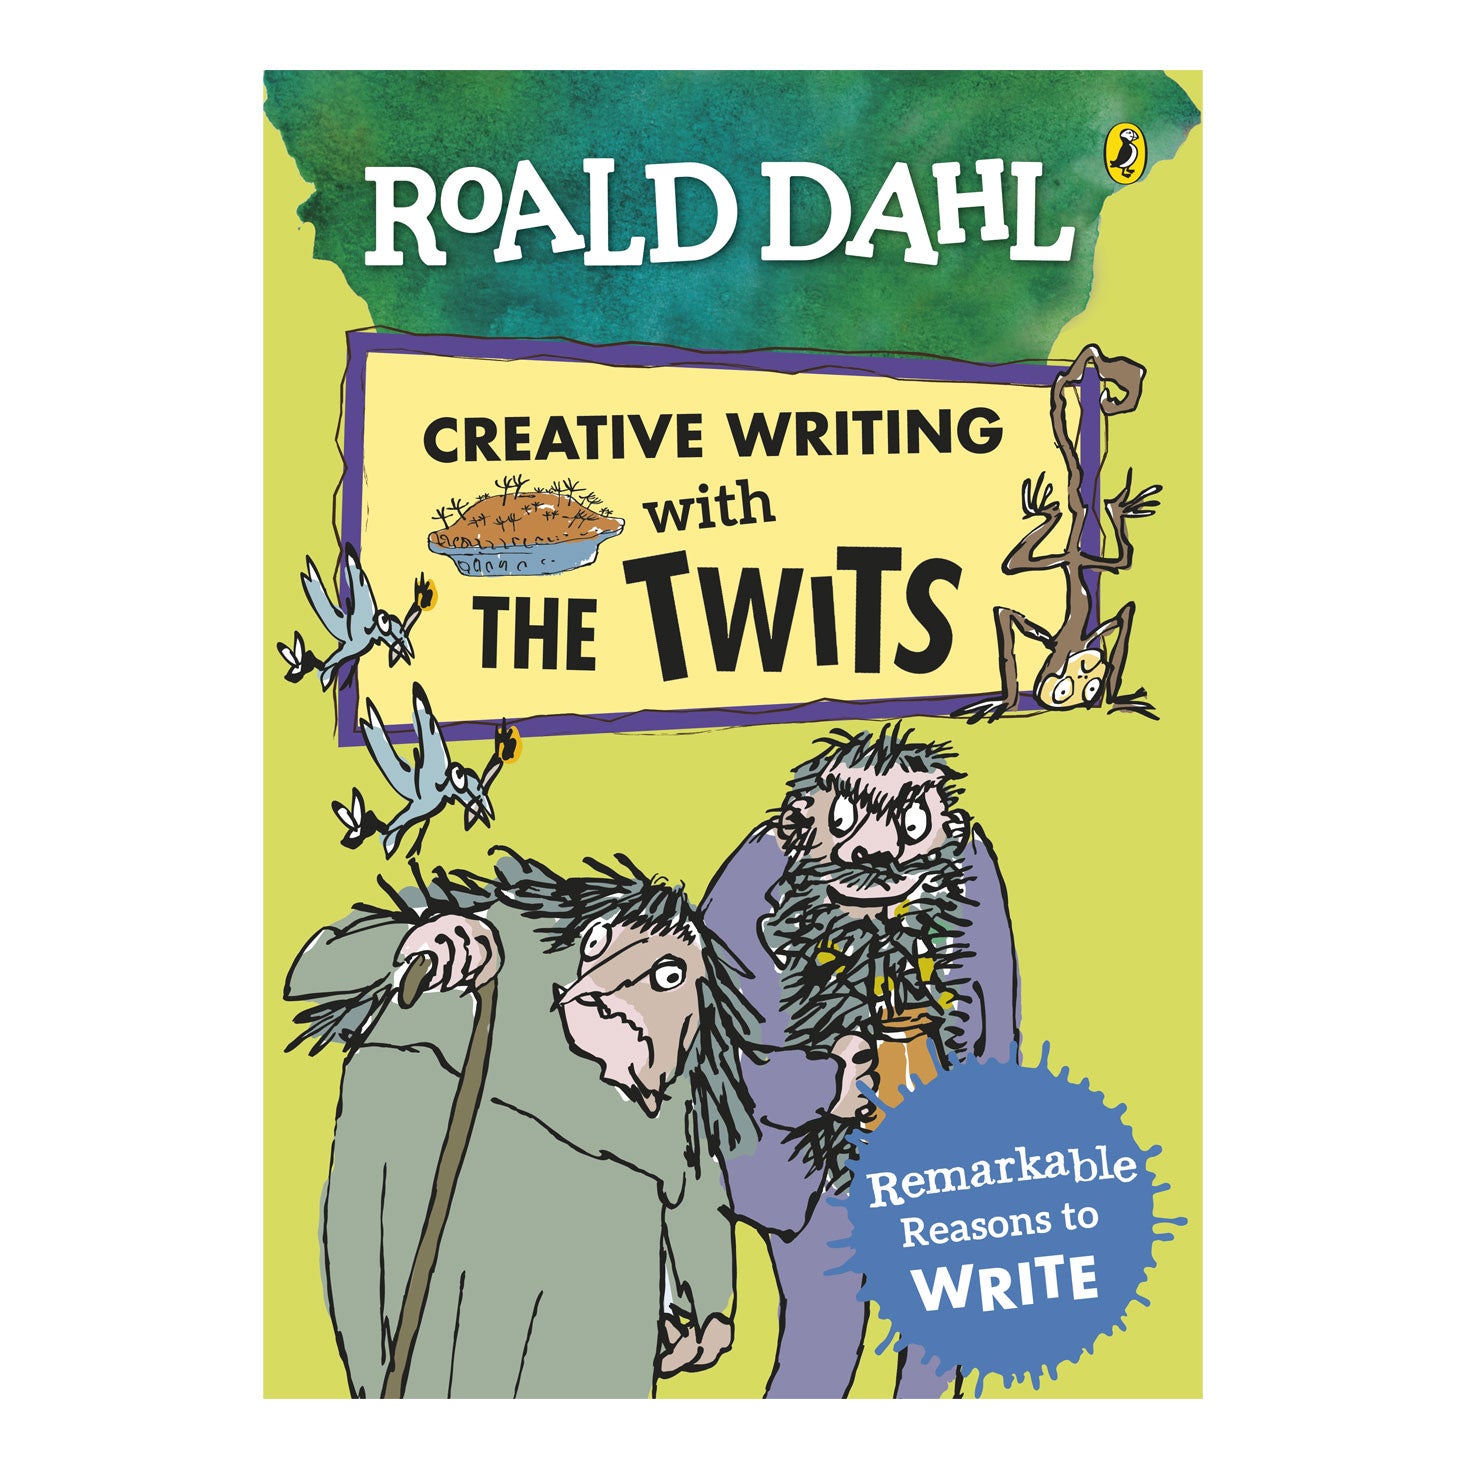 Creative Writing with The Twits based on Roald Dahl with illustrations by Quentin Blake